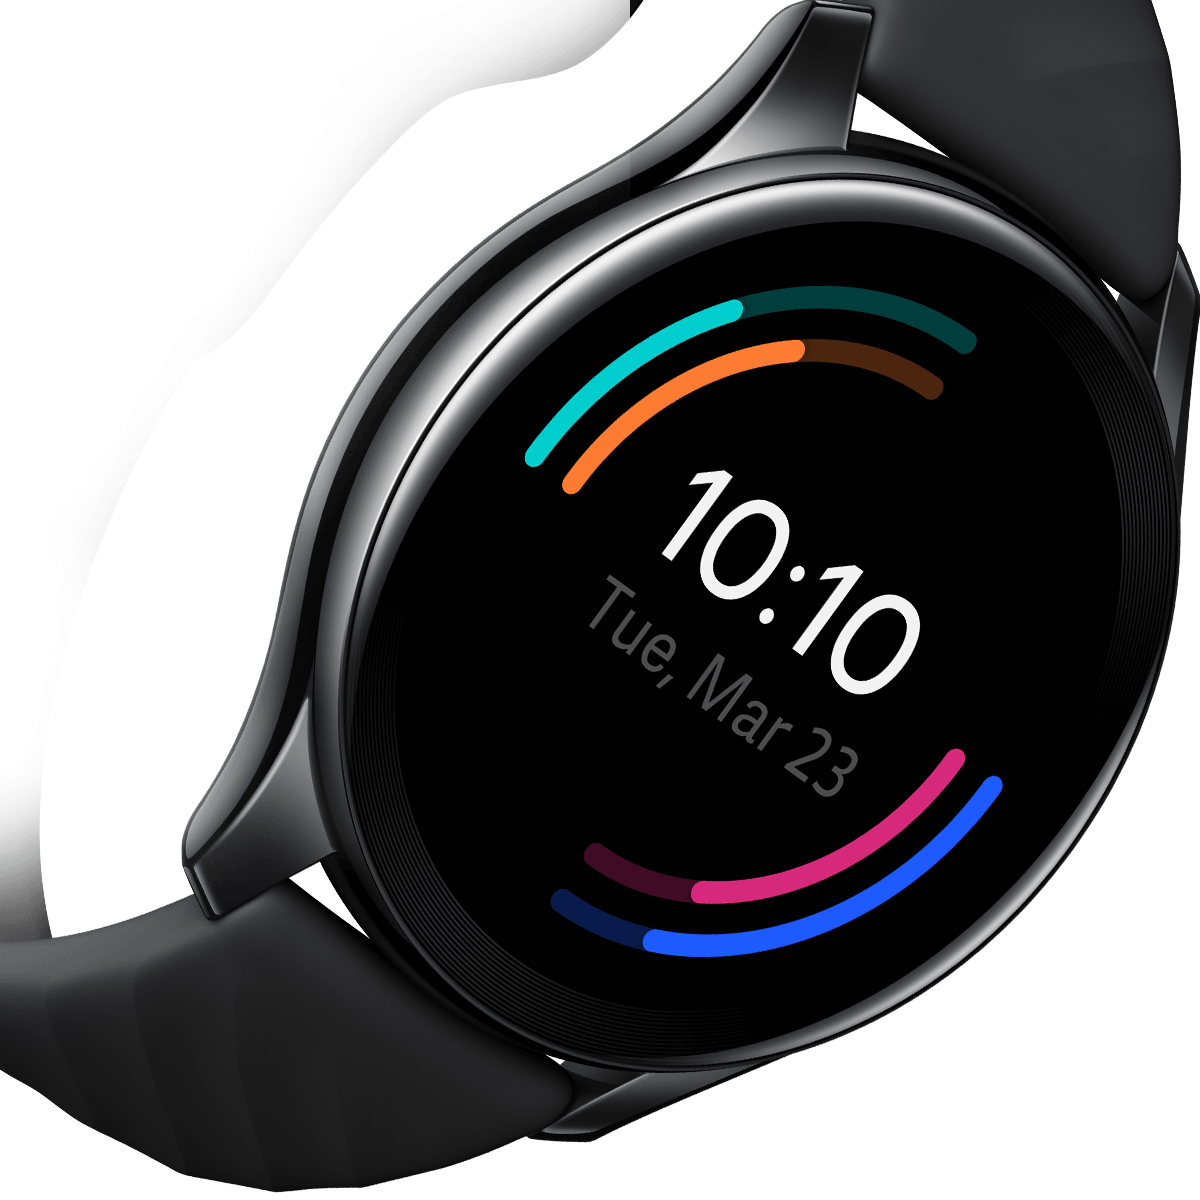 Nord Oneplus Watch